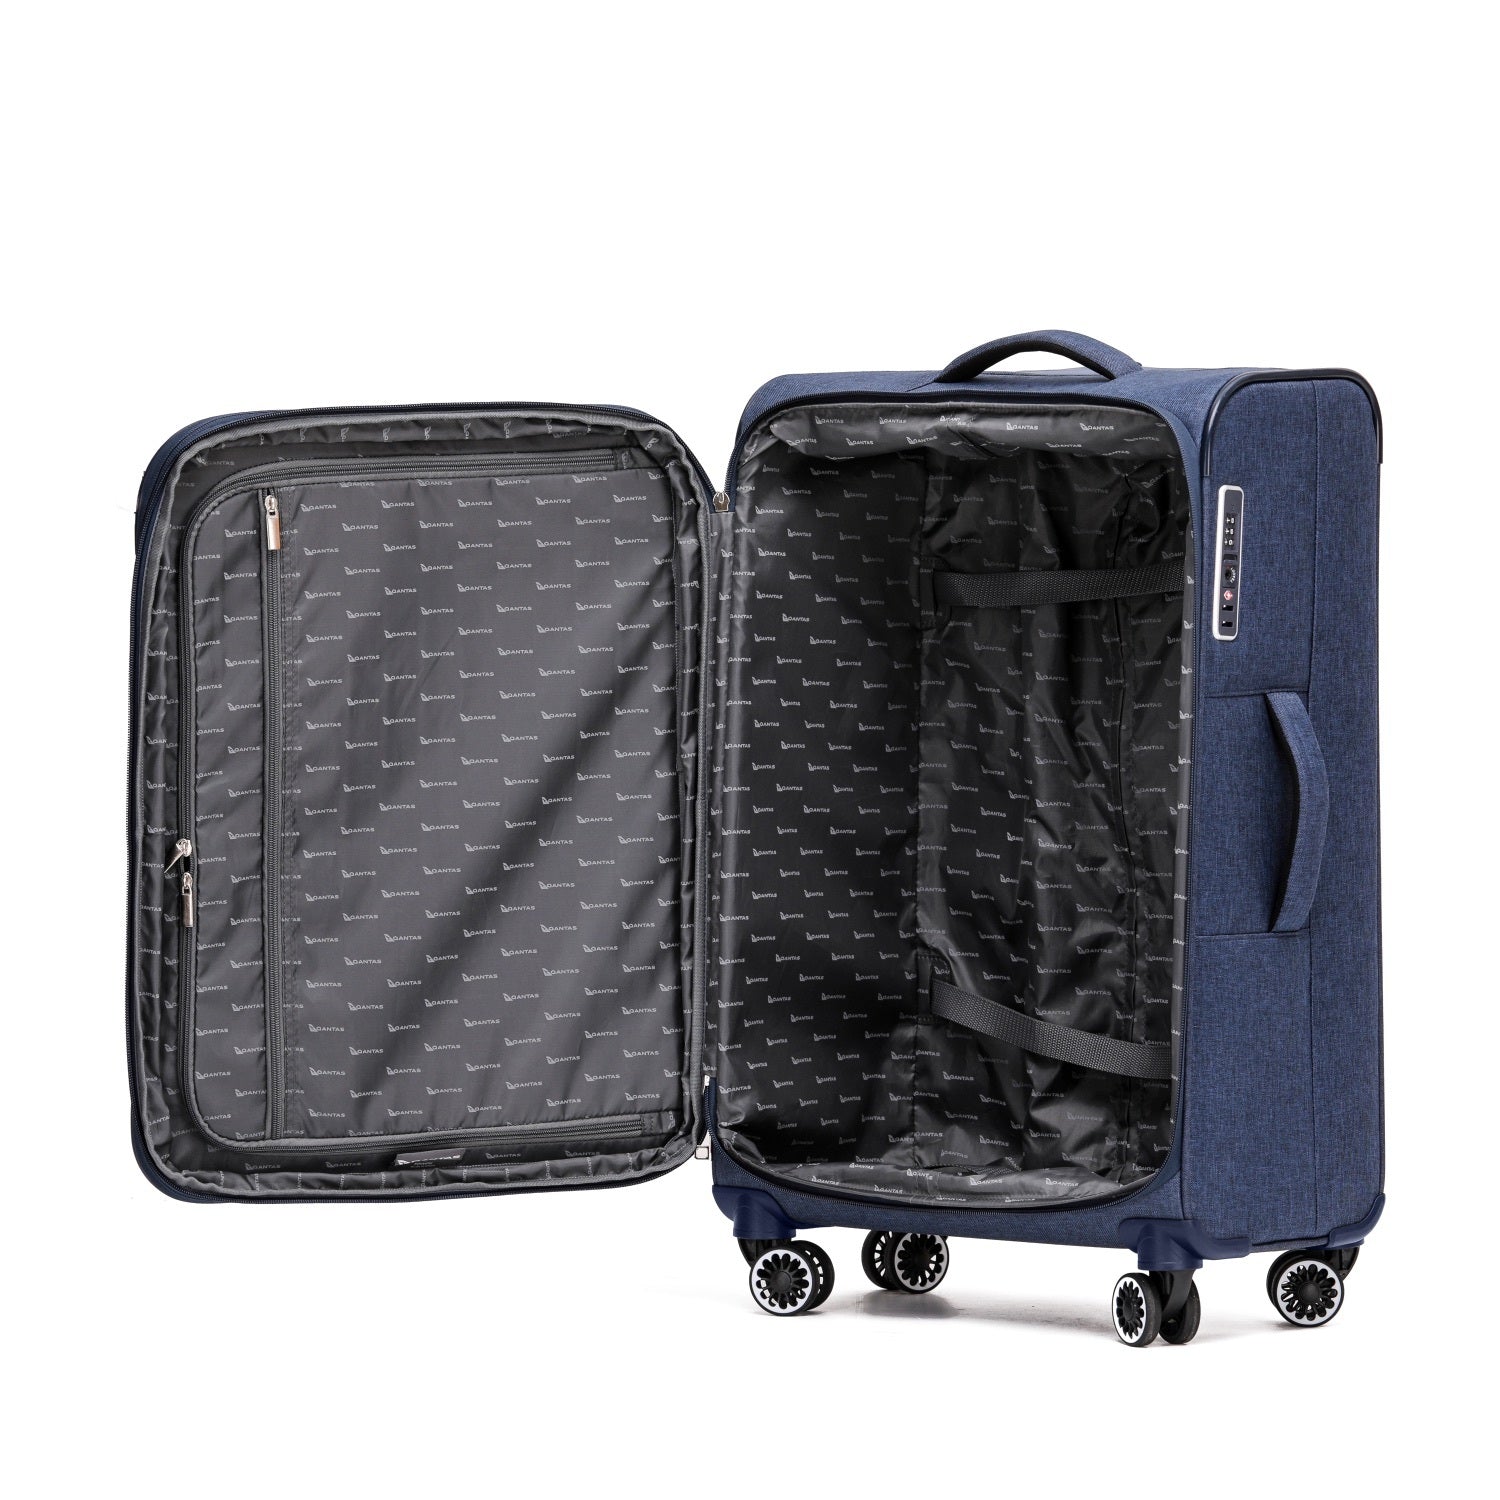 Qantas - QF400 81cm Large Adelaide Soft sided spinner - Navy-7